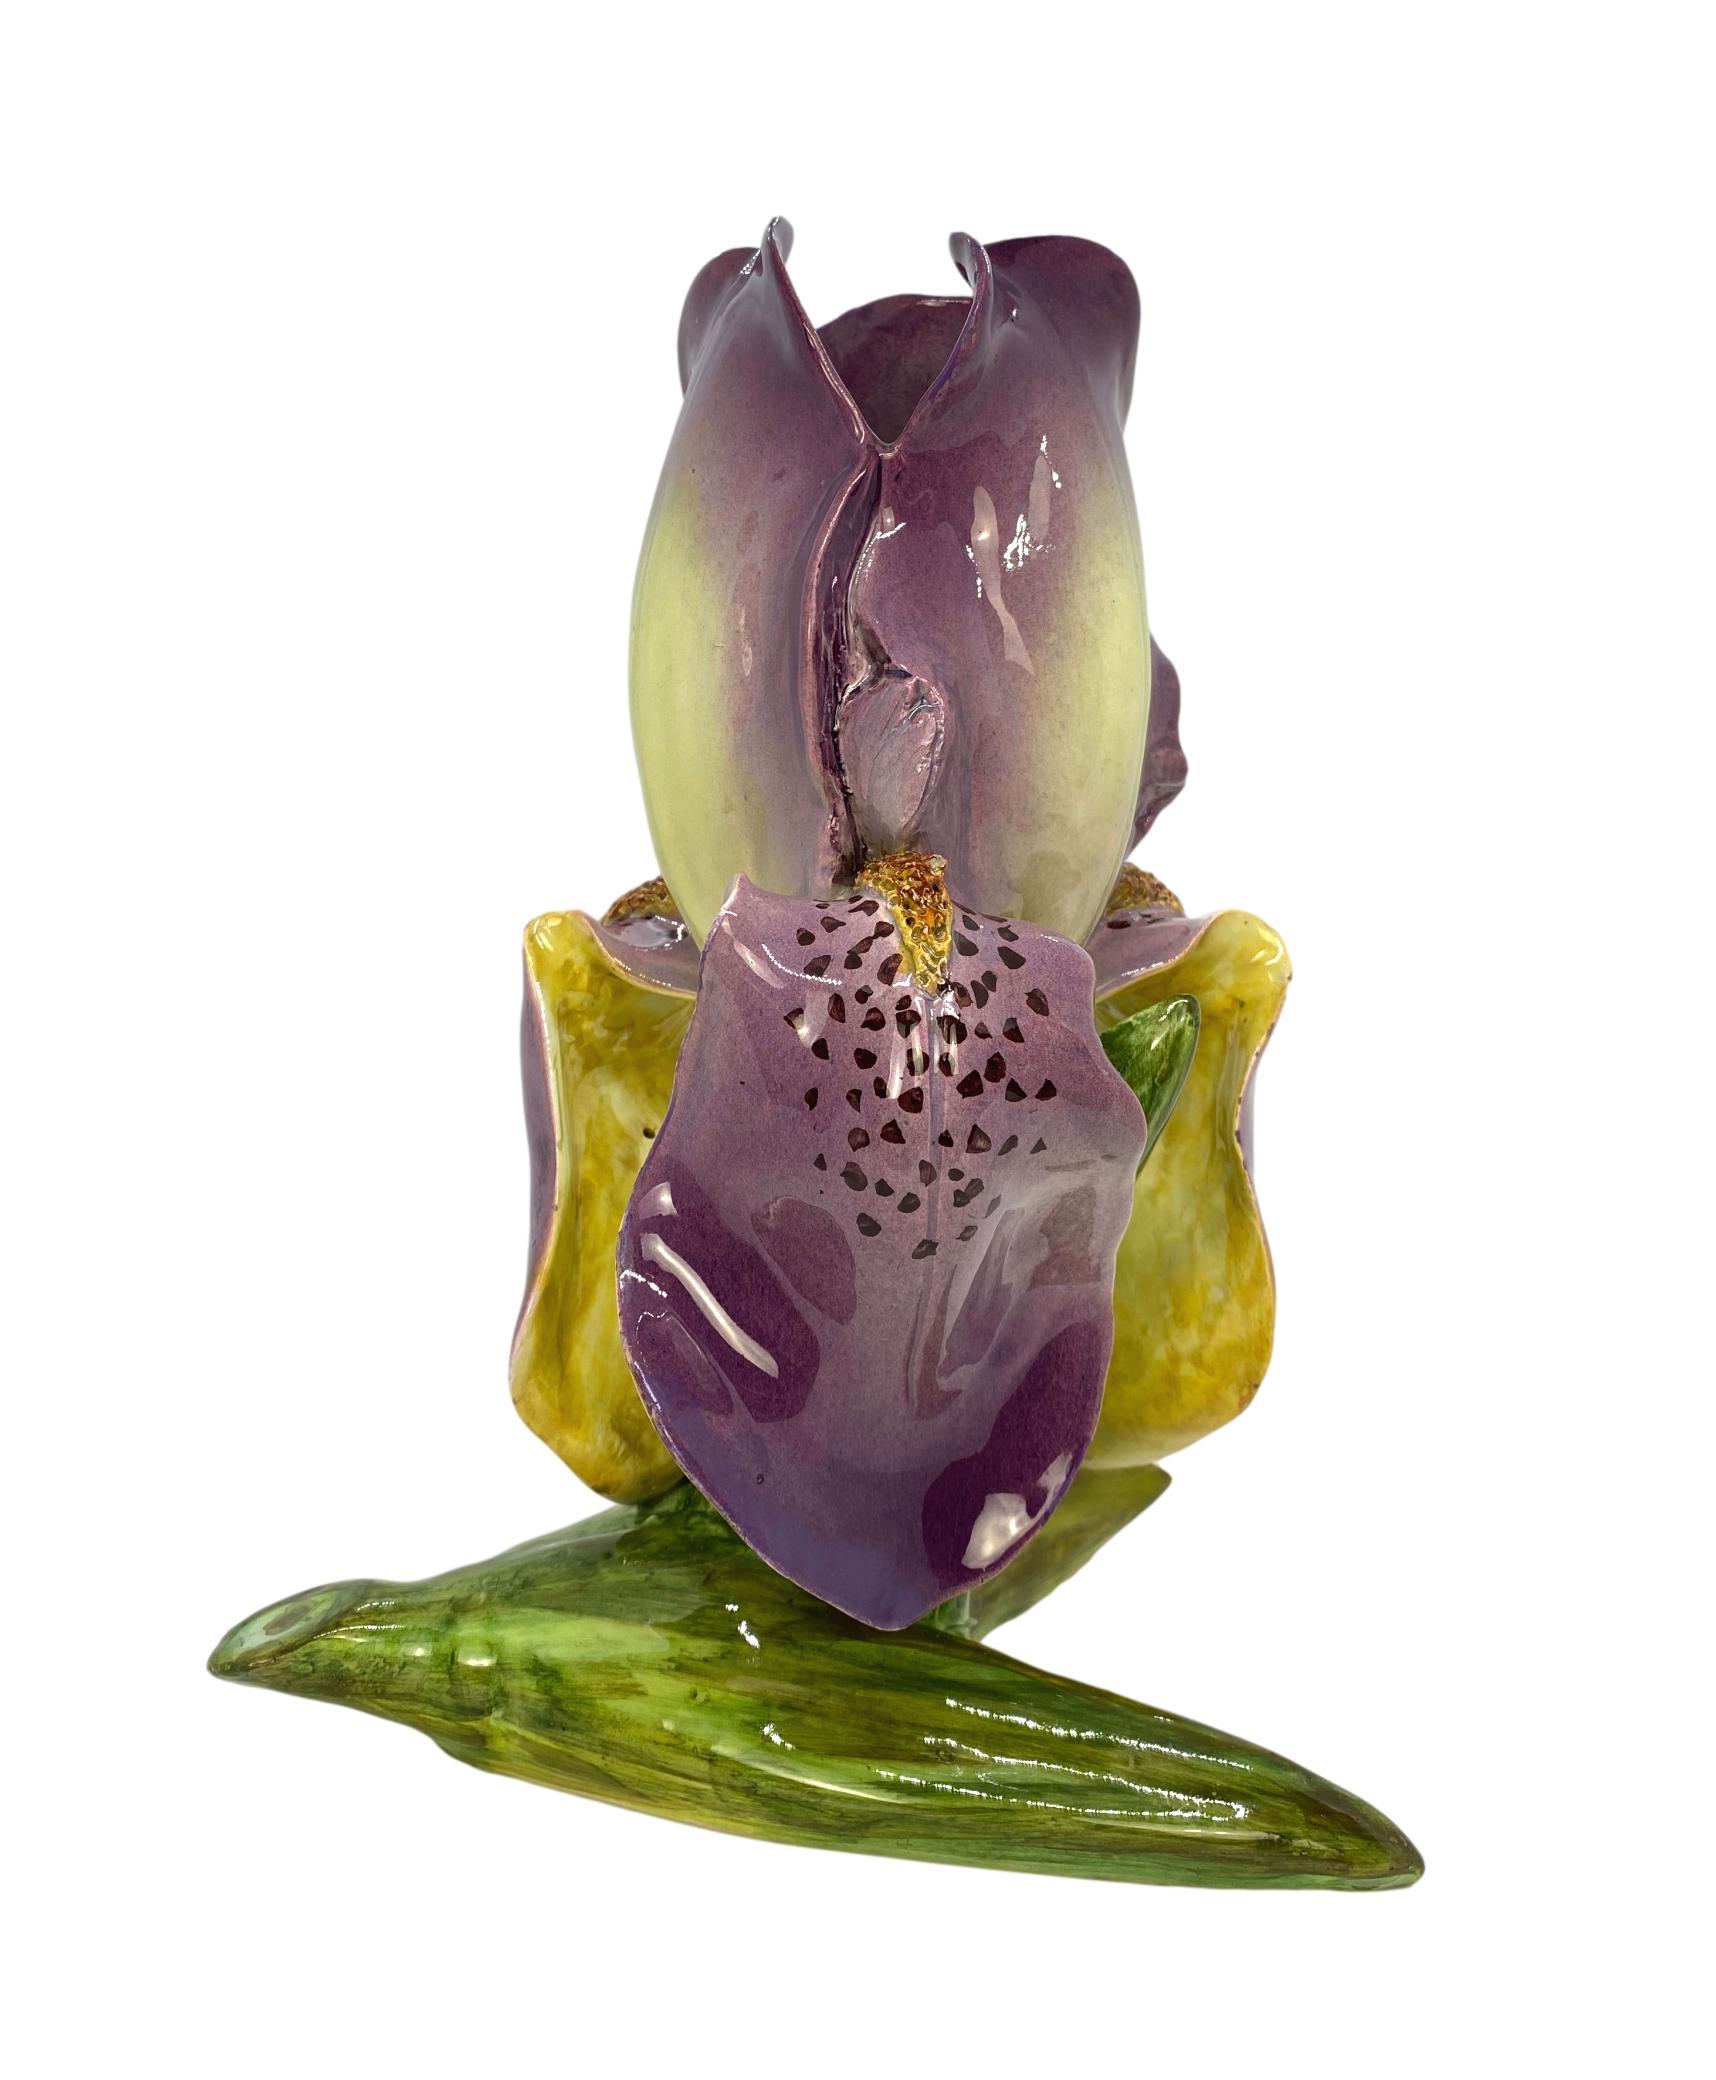 French Majolica (Barbotine) Iris-form vase by Delphin Massier, circa 1870, naturalistically modeled as an oversized blooming iris, the lavender petals forming the body, with an open-top, on a stalk-form base glazed in shades of green, singed on